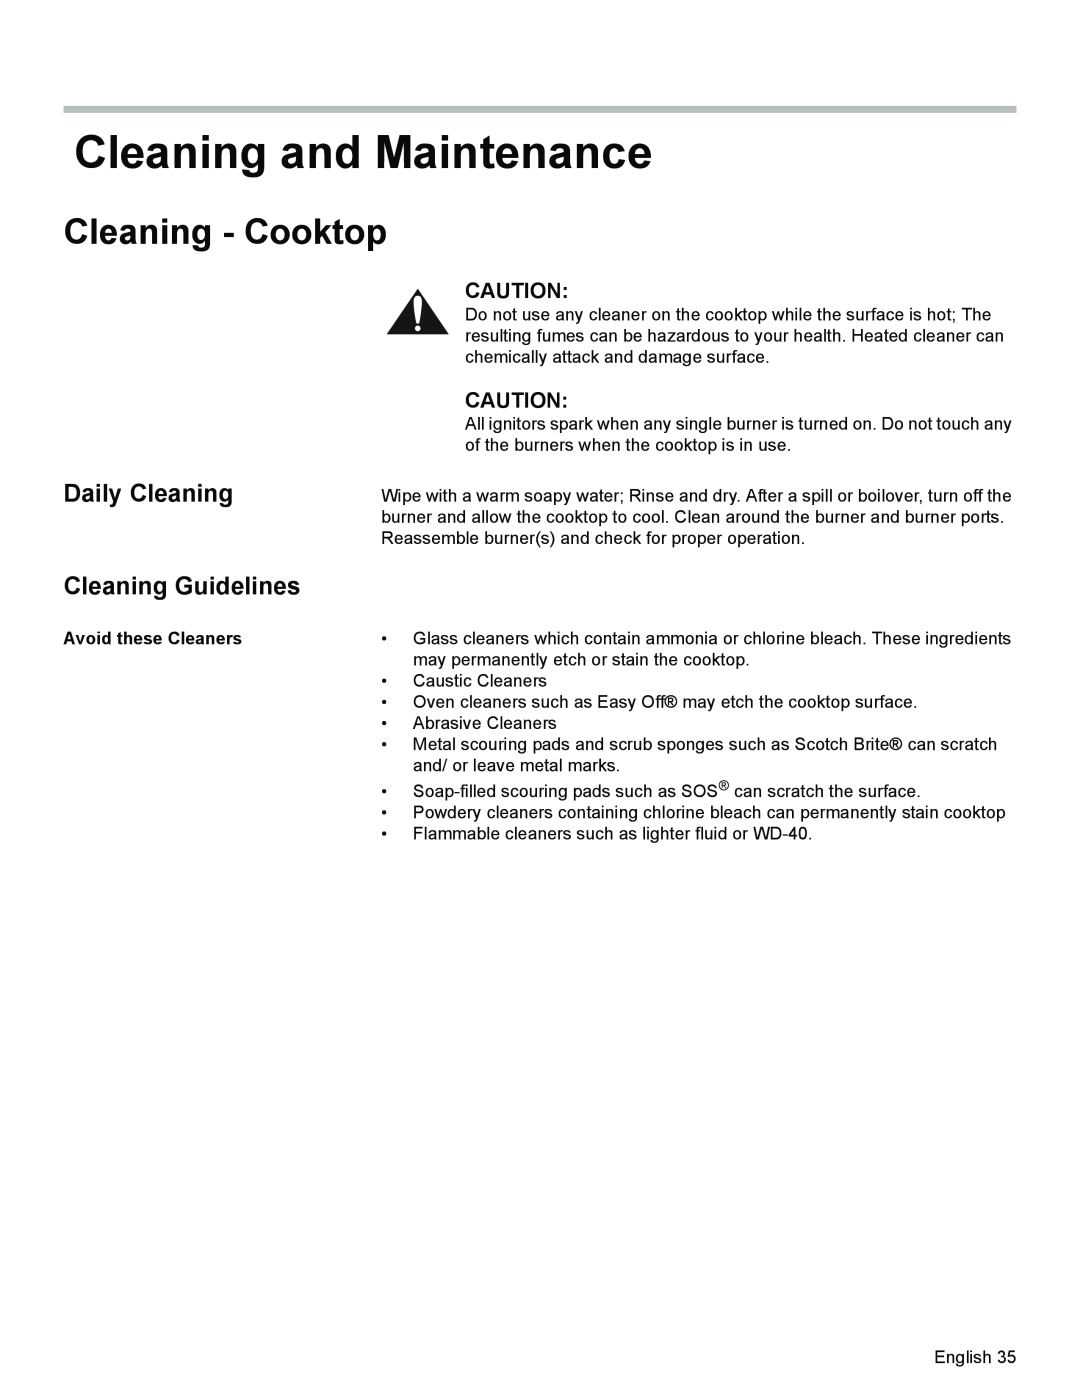 Siemens HG2425UC Cleaning and Maintenance, Cleaning - Cooktop, Daily Cleaning, Cleaning Guidelines, Avoid these Cleaners 